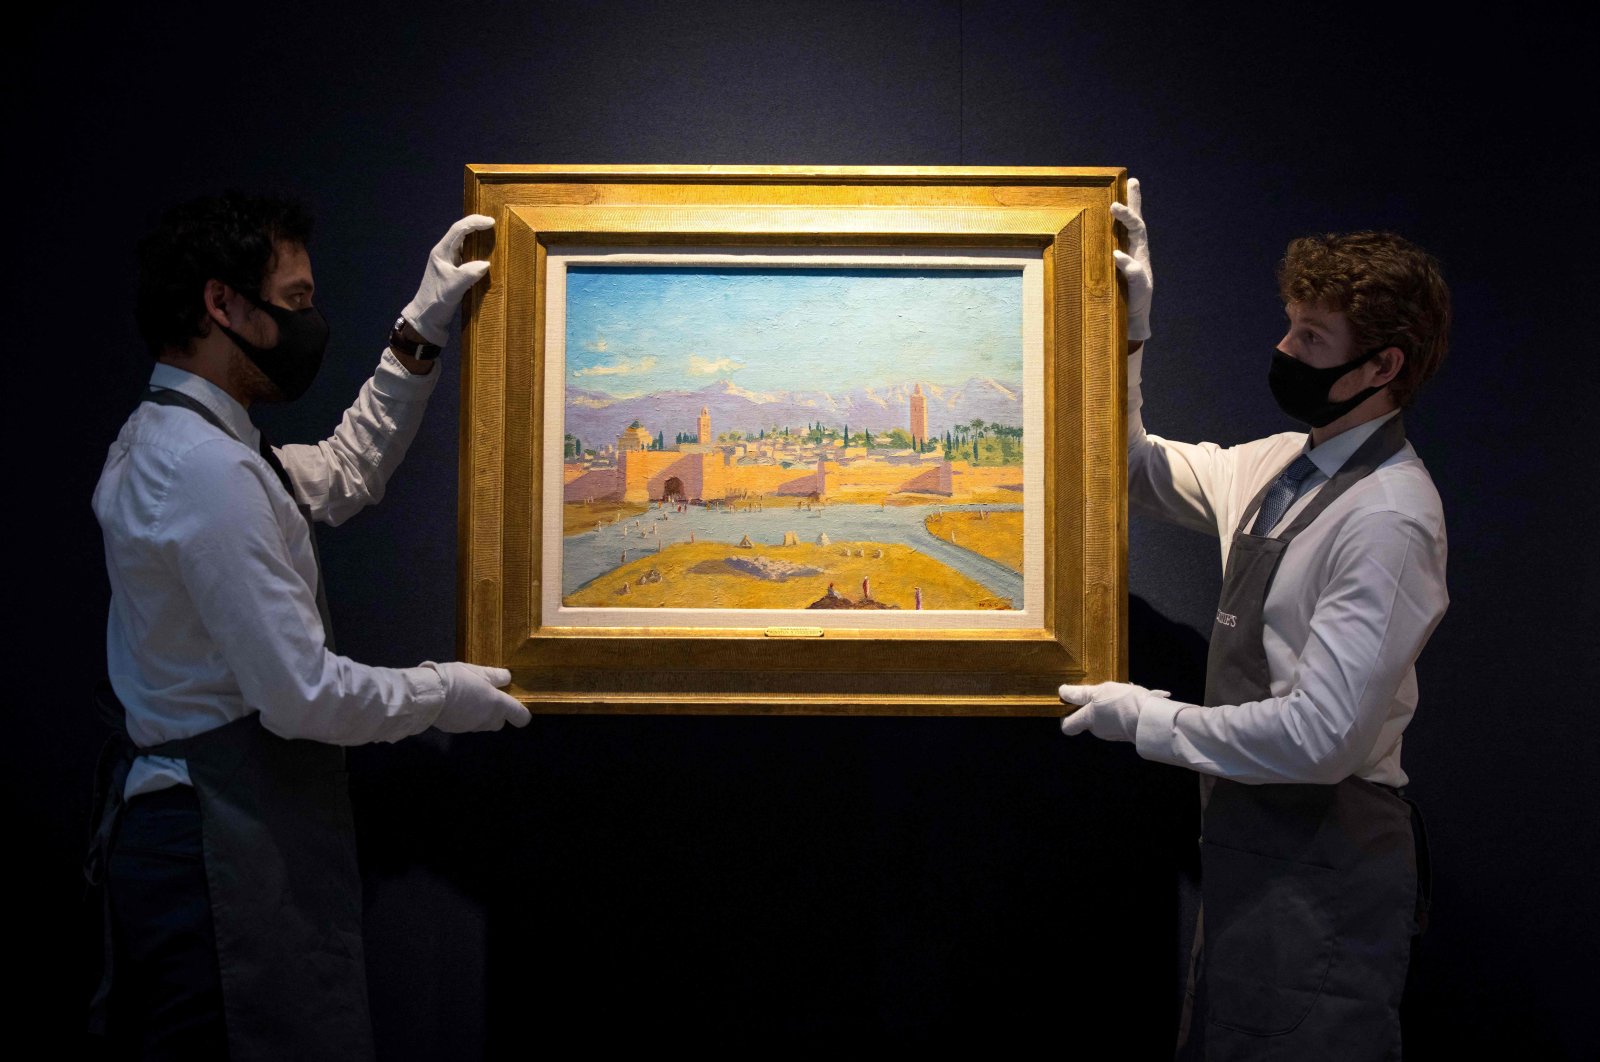 Gallery workers pose with an artwork titled ''Tower of Koutoubia Mosque'' by Winston Churchill during a photocall at Christie's auction house in London, England, Feb. 17, 2021. (AFP Photo)